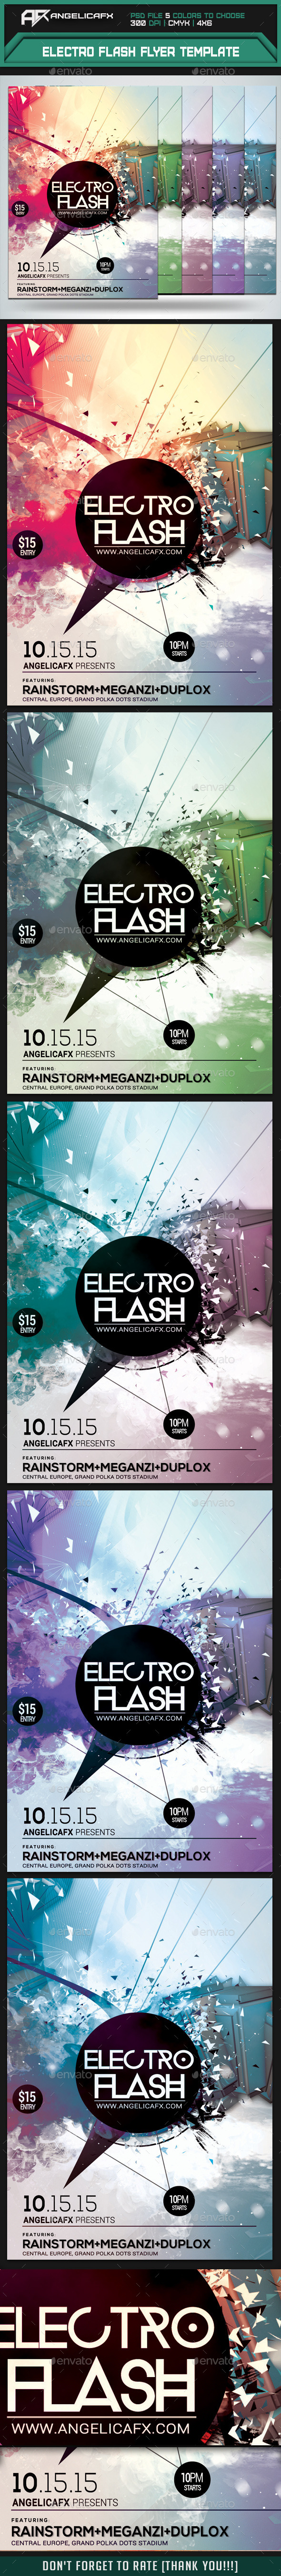 Electro Flash Flyer Template